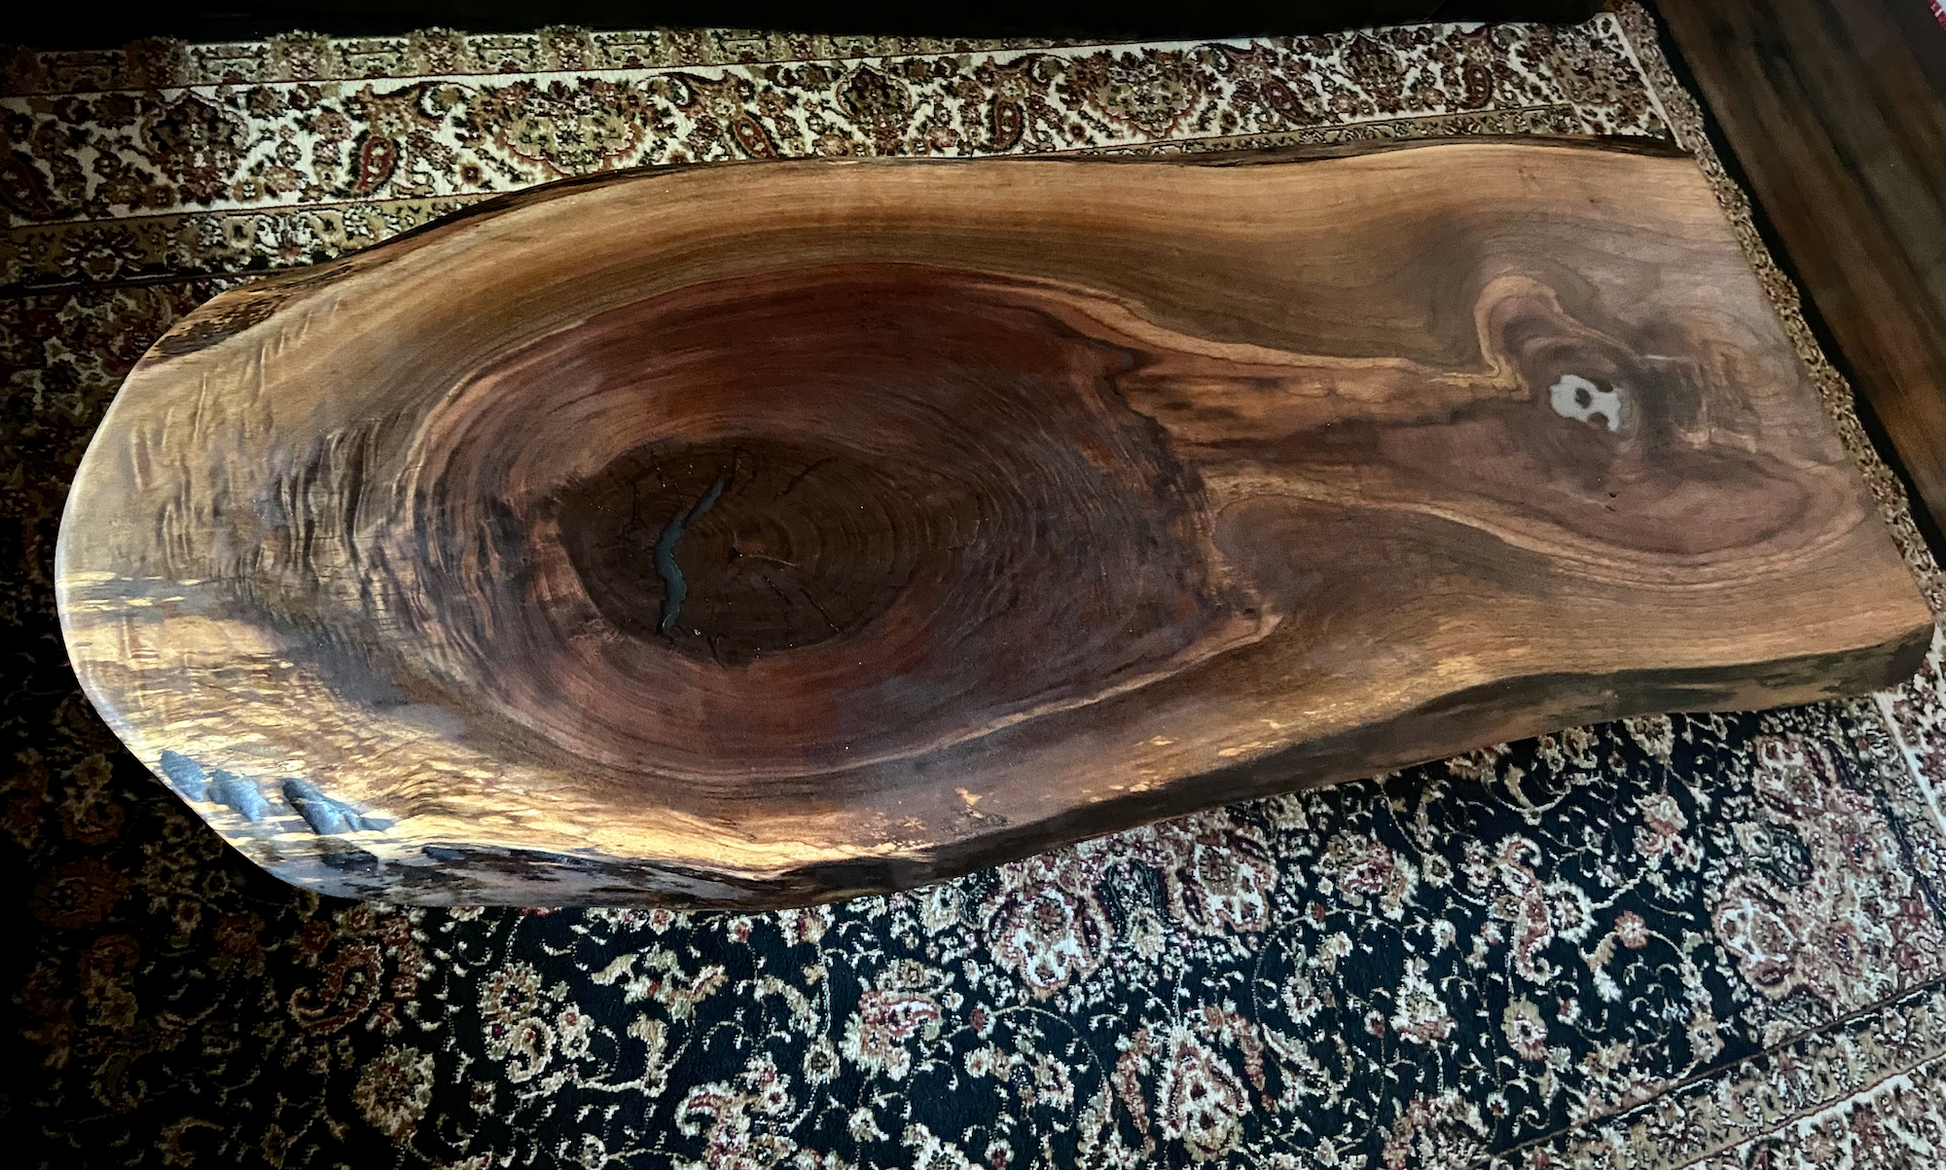 Live edge black walnut wood coffee table with gorgeous grain patterns, complete with a large knot, a smaller knot, and radial grain dancing around the entire table.Ultra unique oval rustic natural live edge black walnut coffee table offers natural walnut wood with gorgeous grain patterns, complete with a large knot, a smaller knot, radial grain dancing around the entire table, completed with curl and a long oval shape.